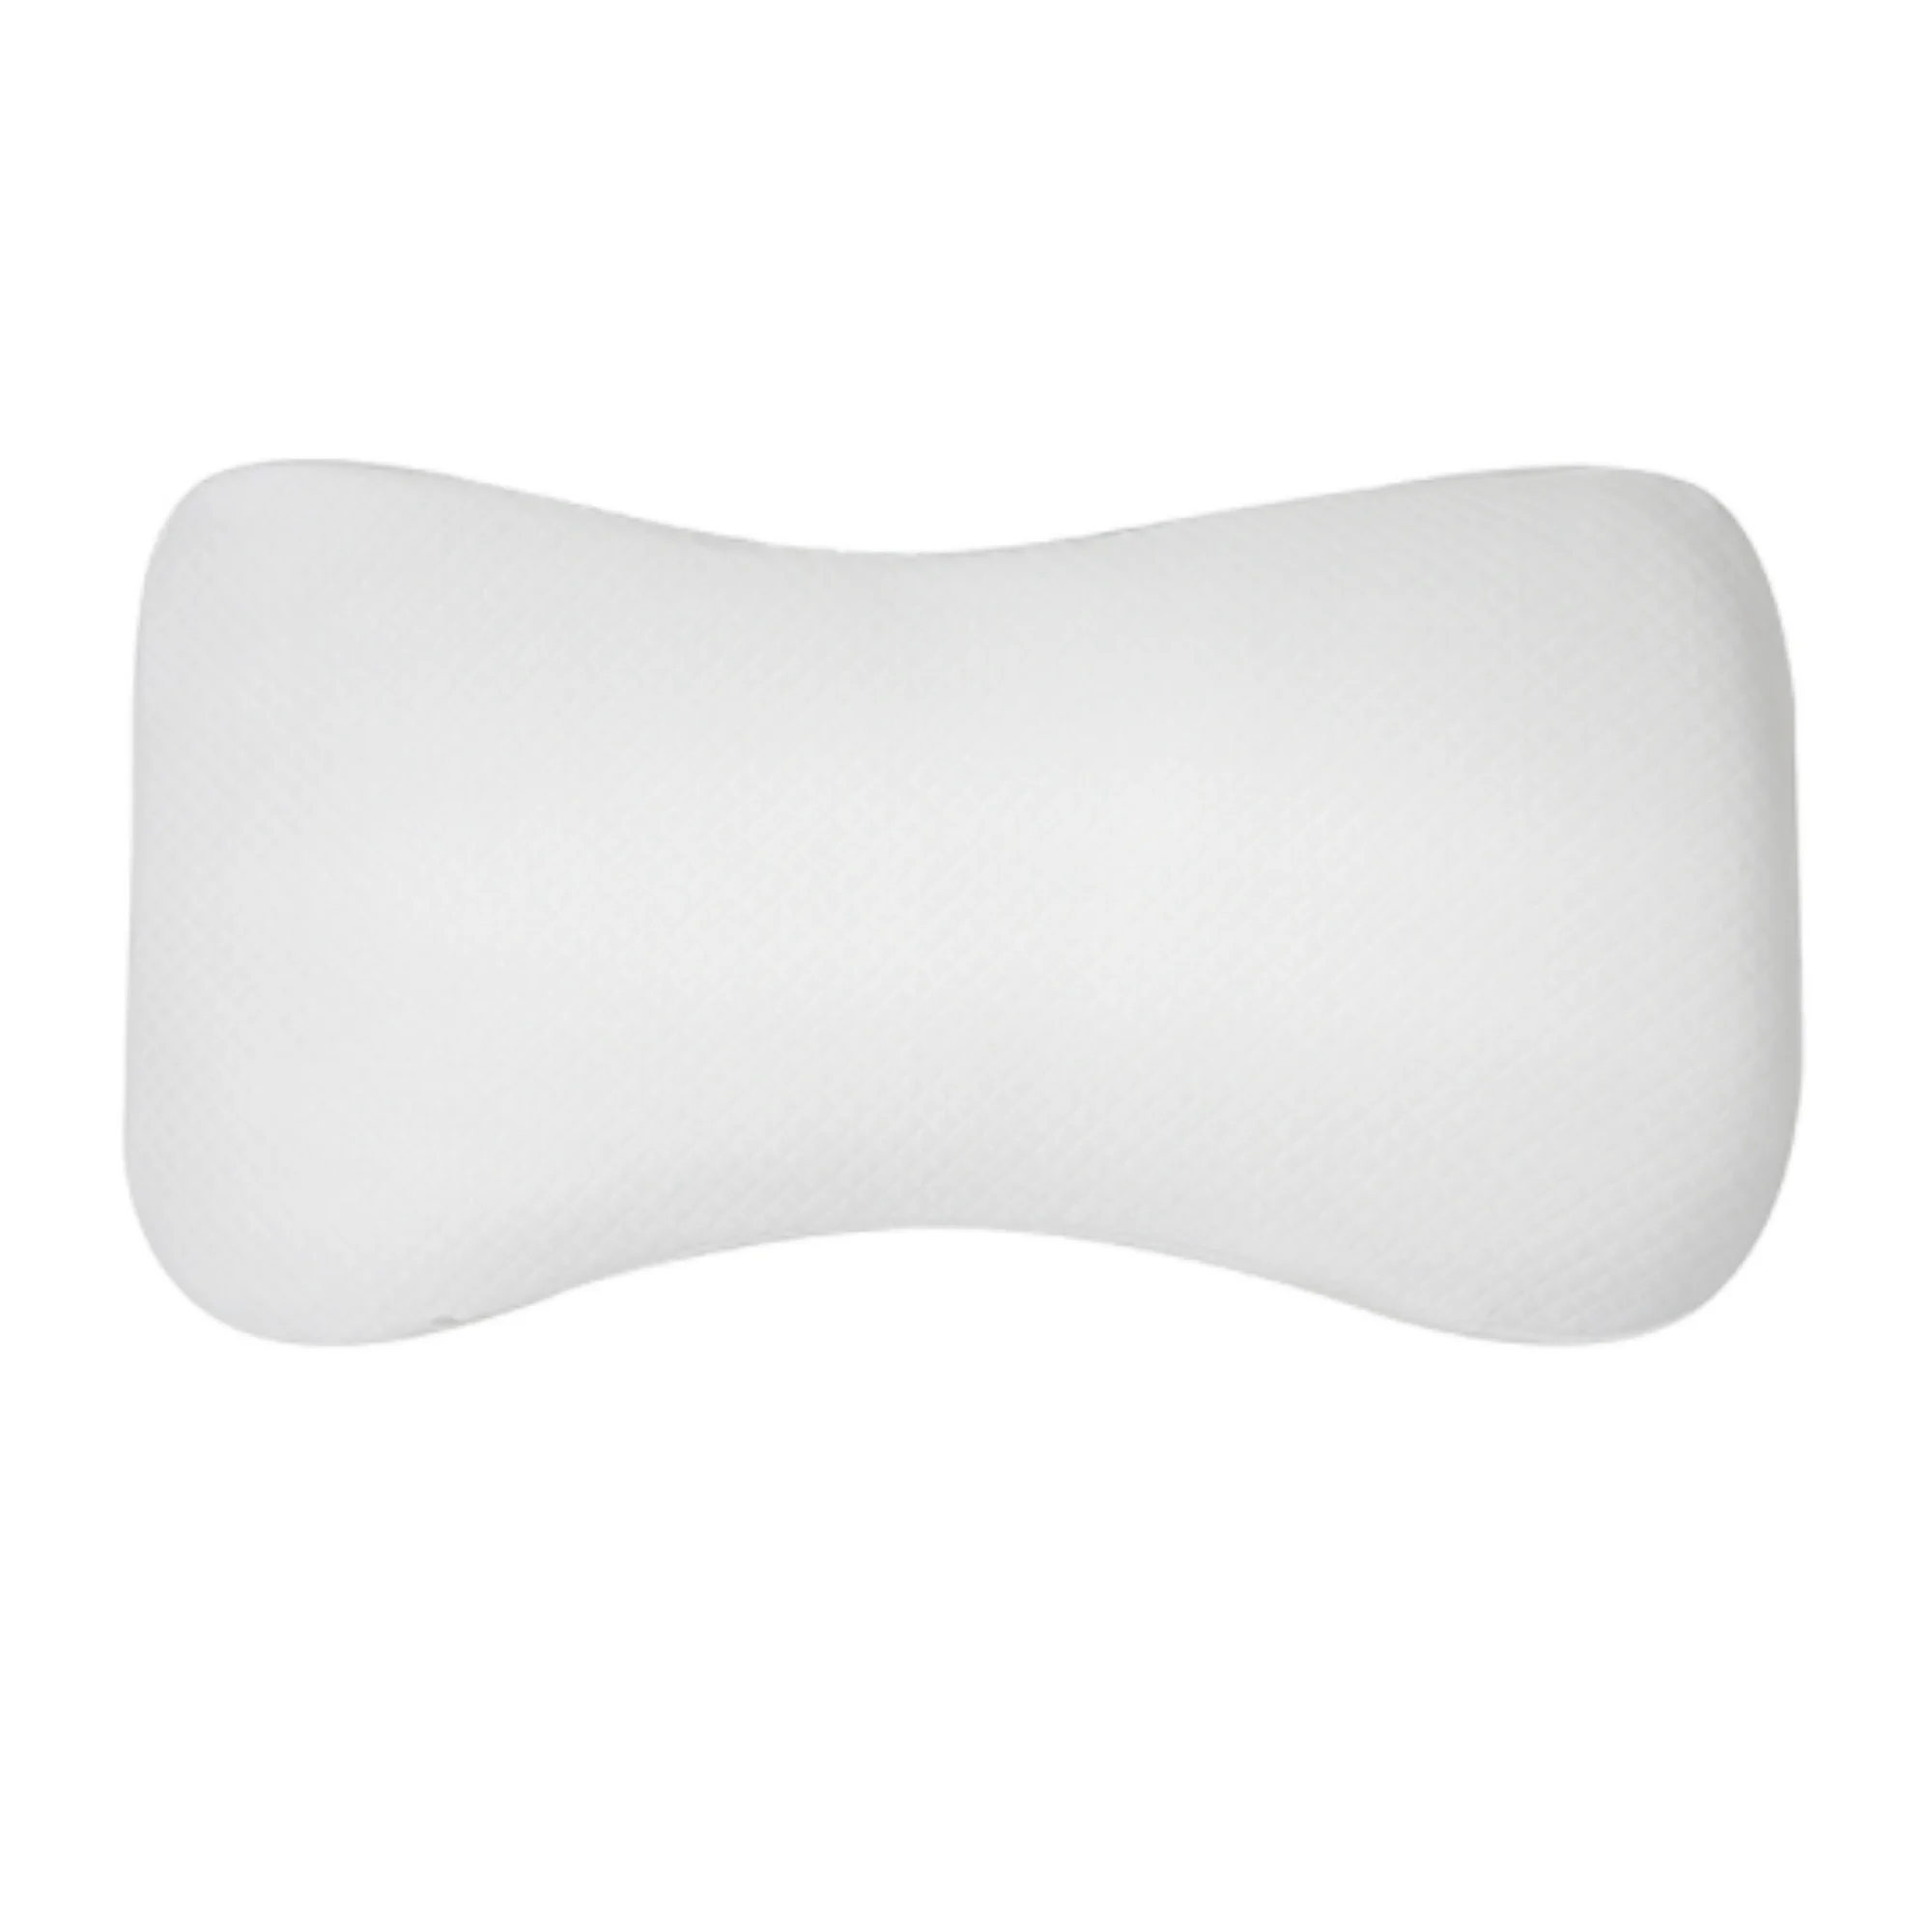 Plagiocefaly prevention baby cushion, detourable pillow to prevent and cure baby flat head